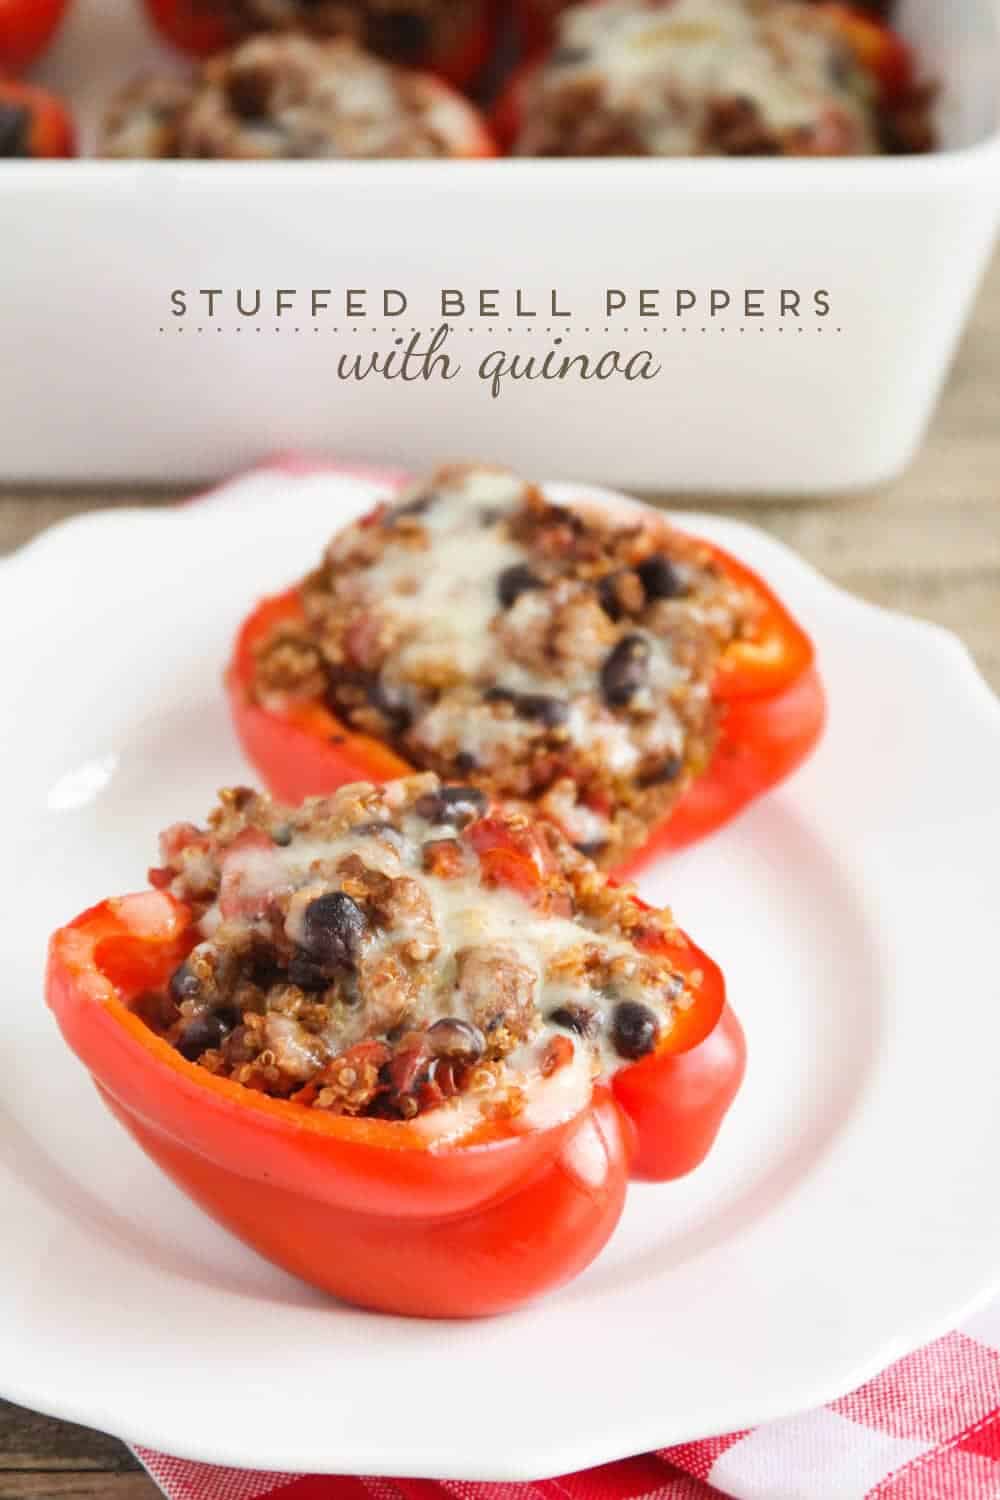 Quinoa stuffed bell peppers on a white plate.